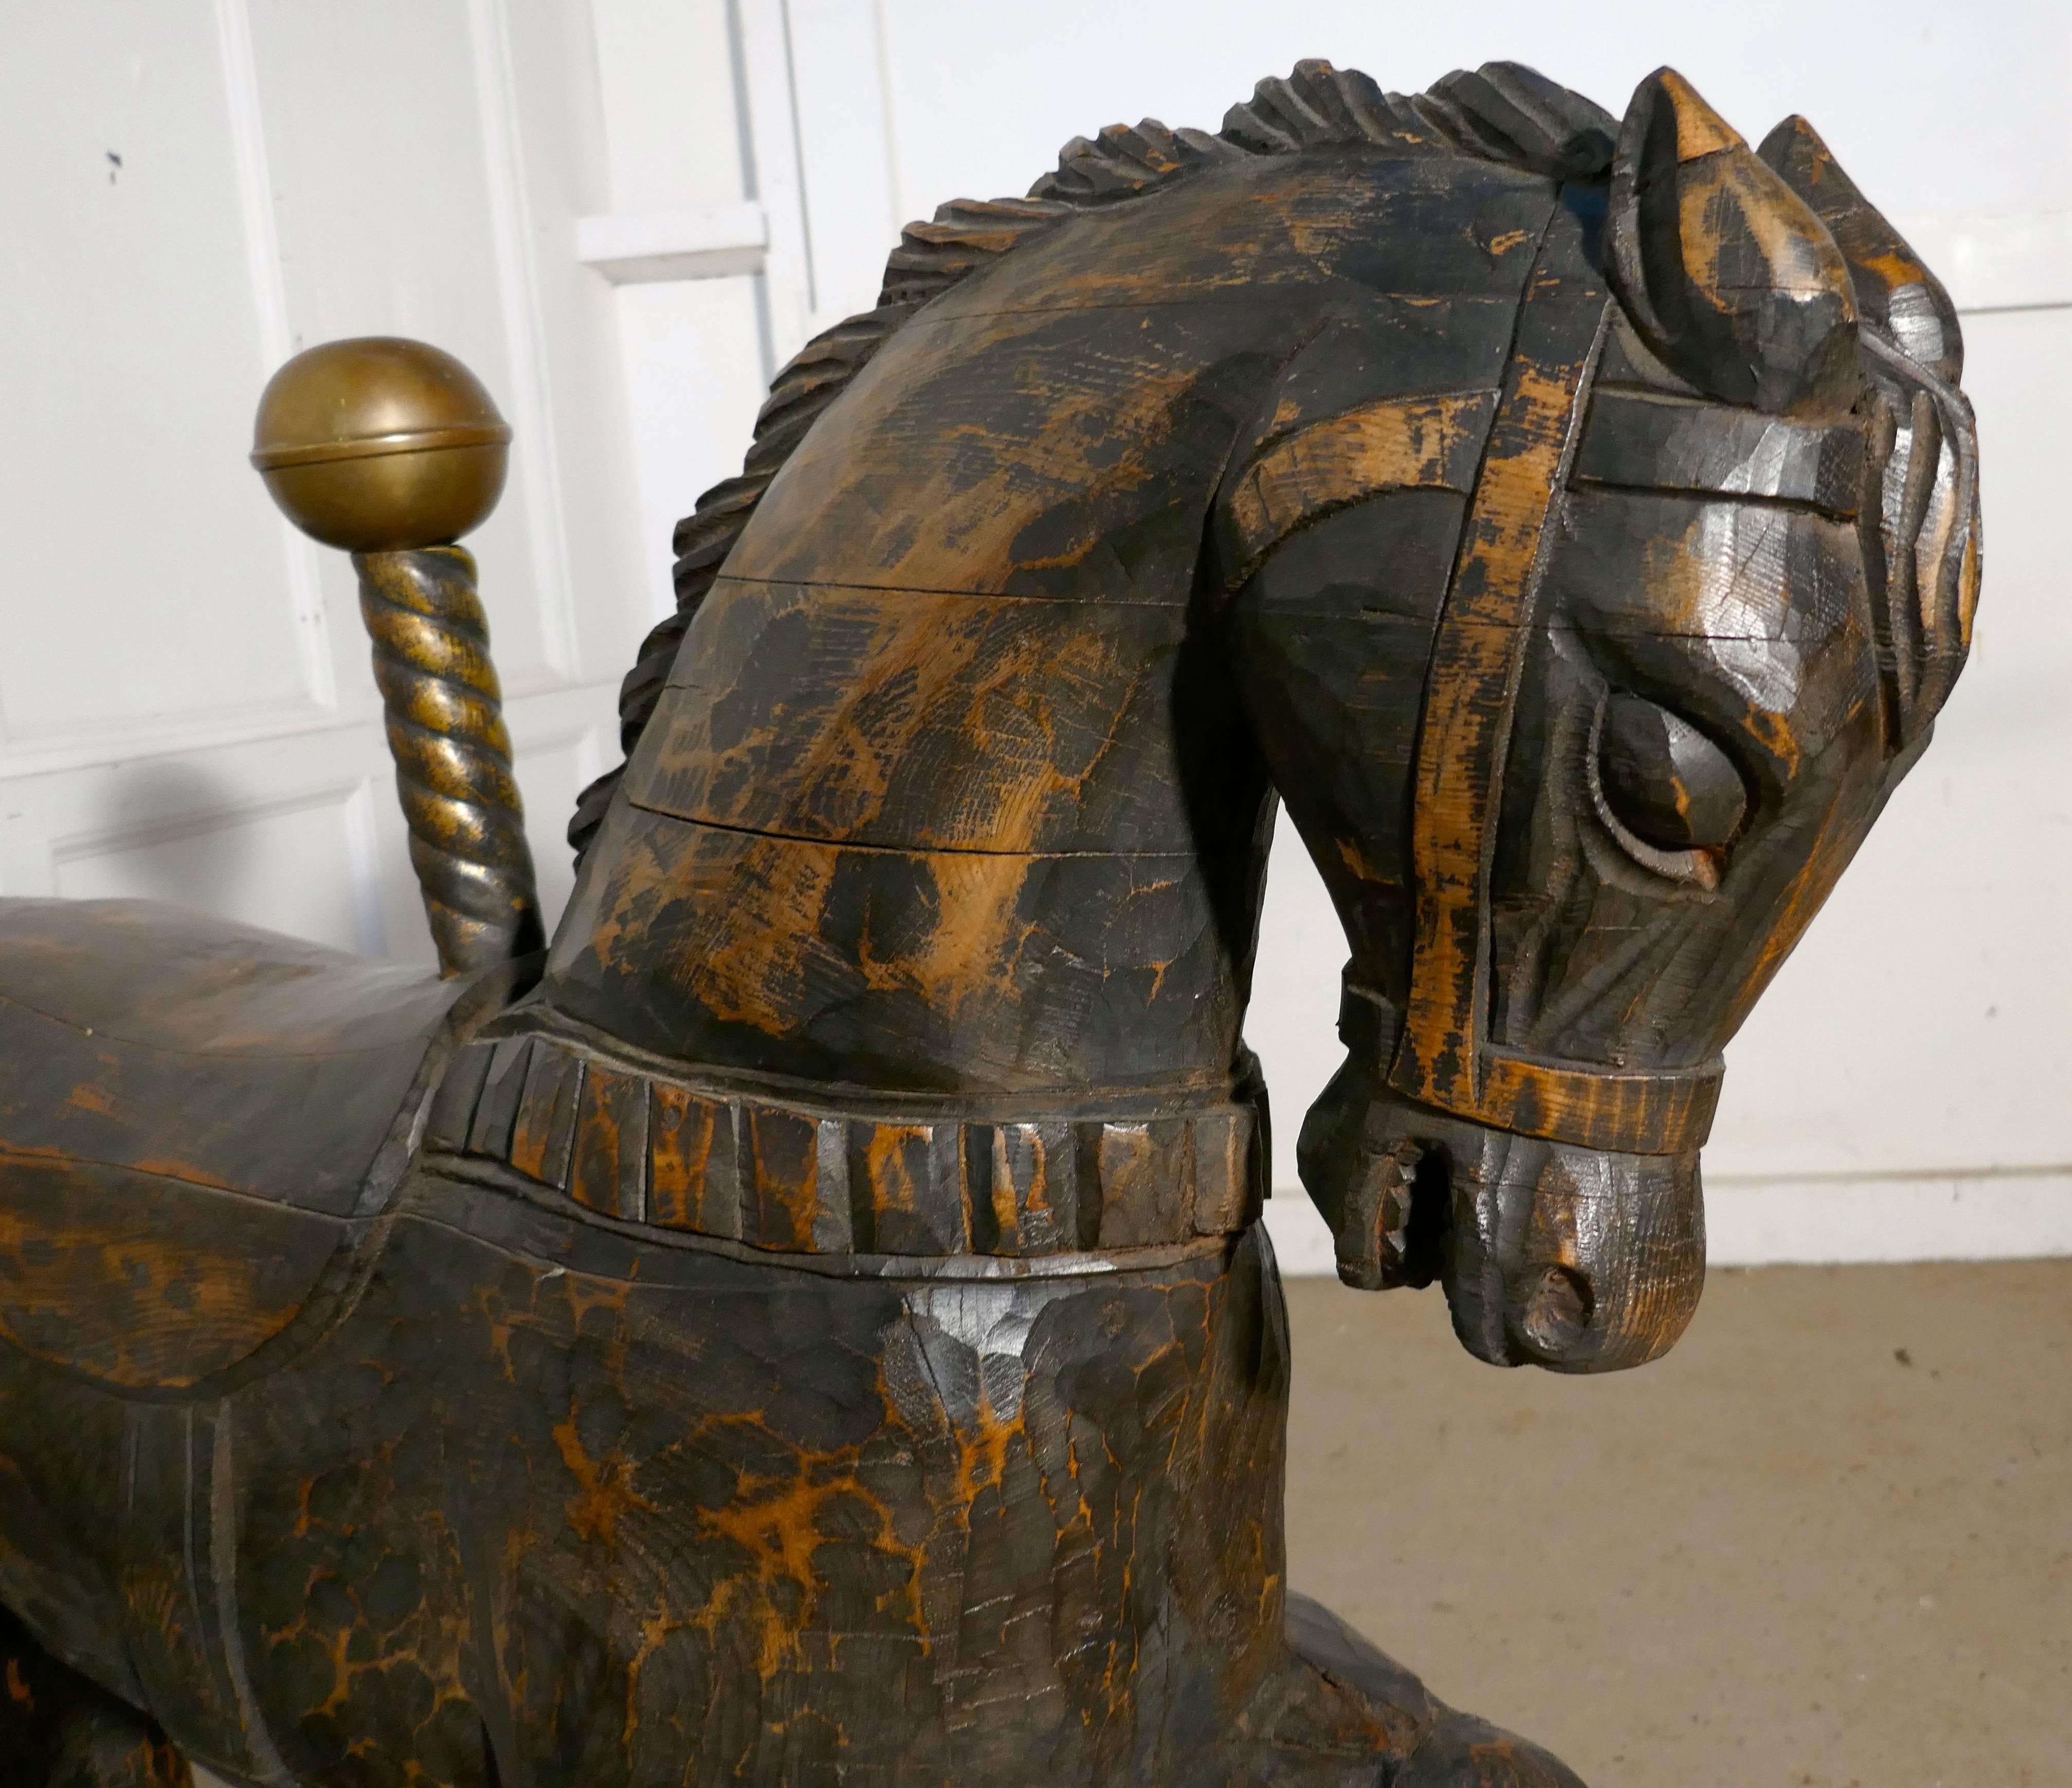 19th century wooden Spanish Carousel Galloper or fair ground horse

19th century fair ground Galloper, carved in wood and in fine detail you can see his mane, tail, eyes, saddle and even his shoes, the wood has a fantastic patina 

This